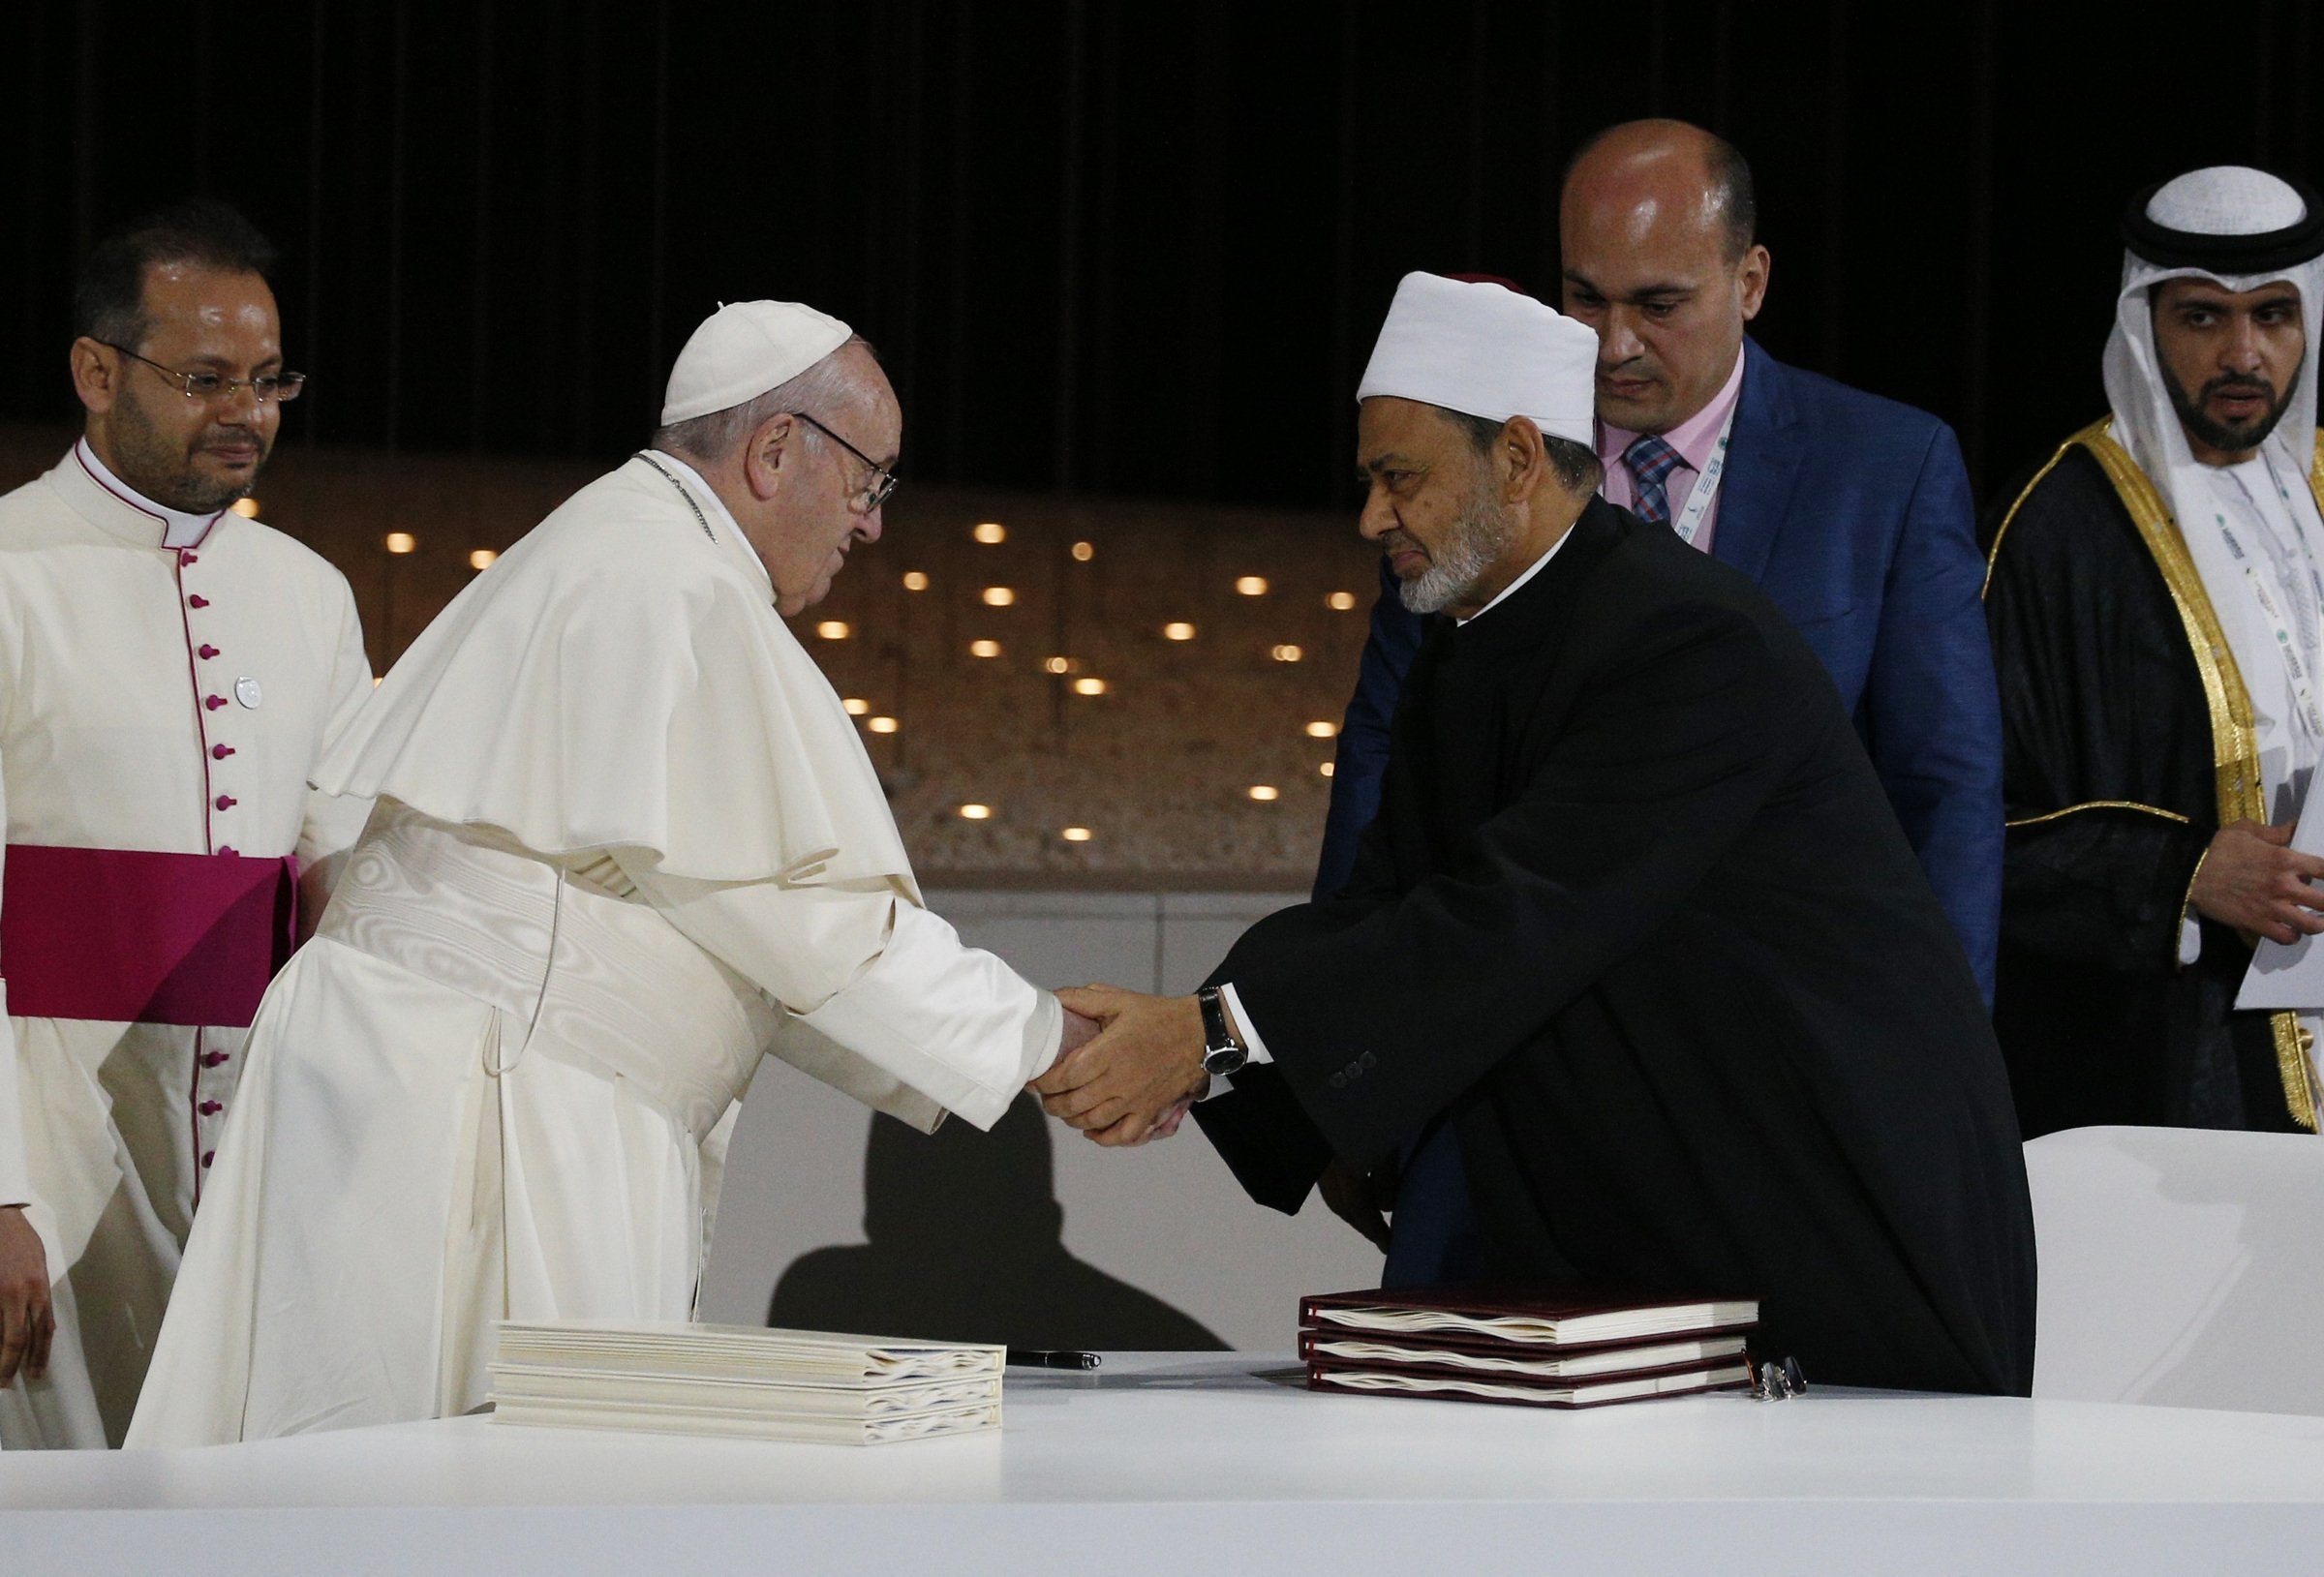 Podcast The pope and the grand imam walk a thorny path in Catholic-Muslim relations America Magazine